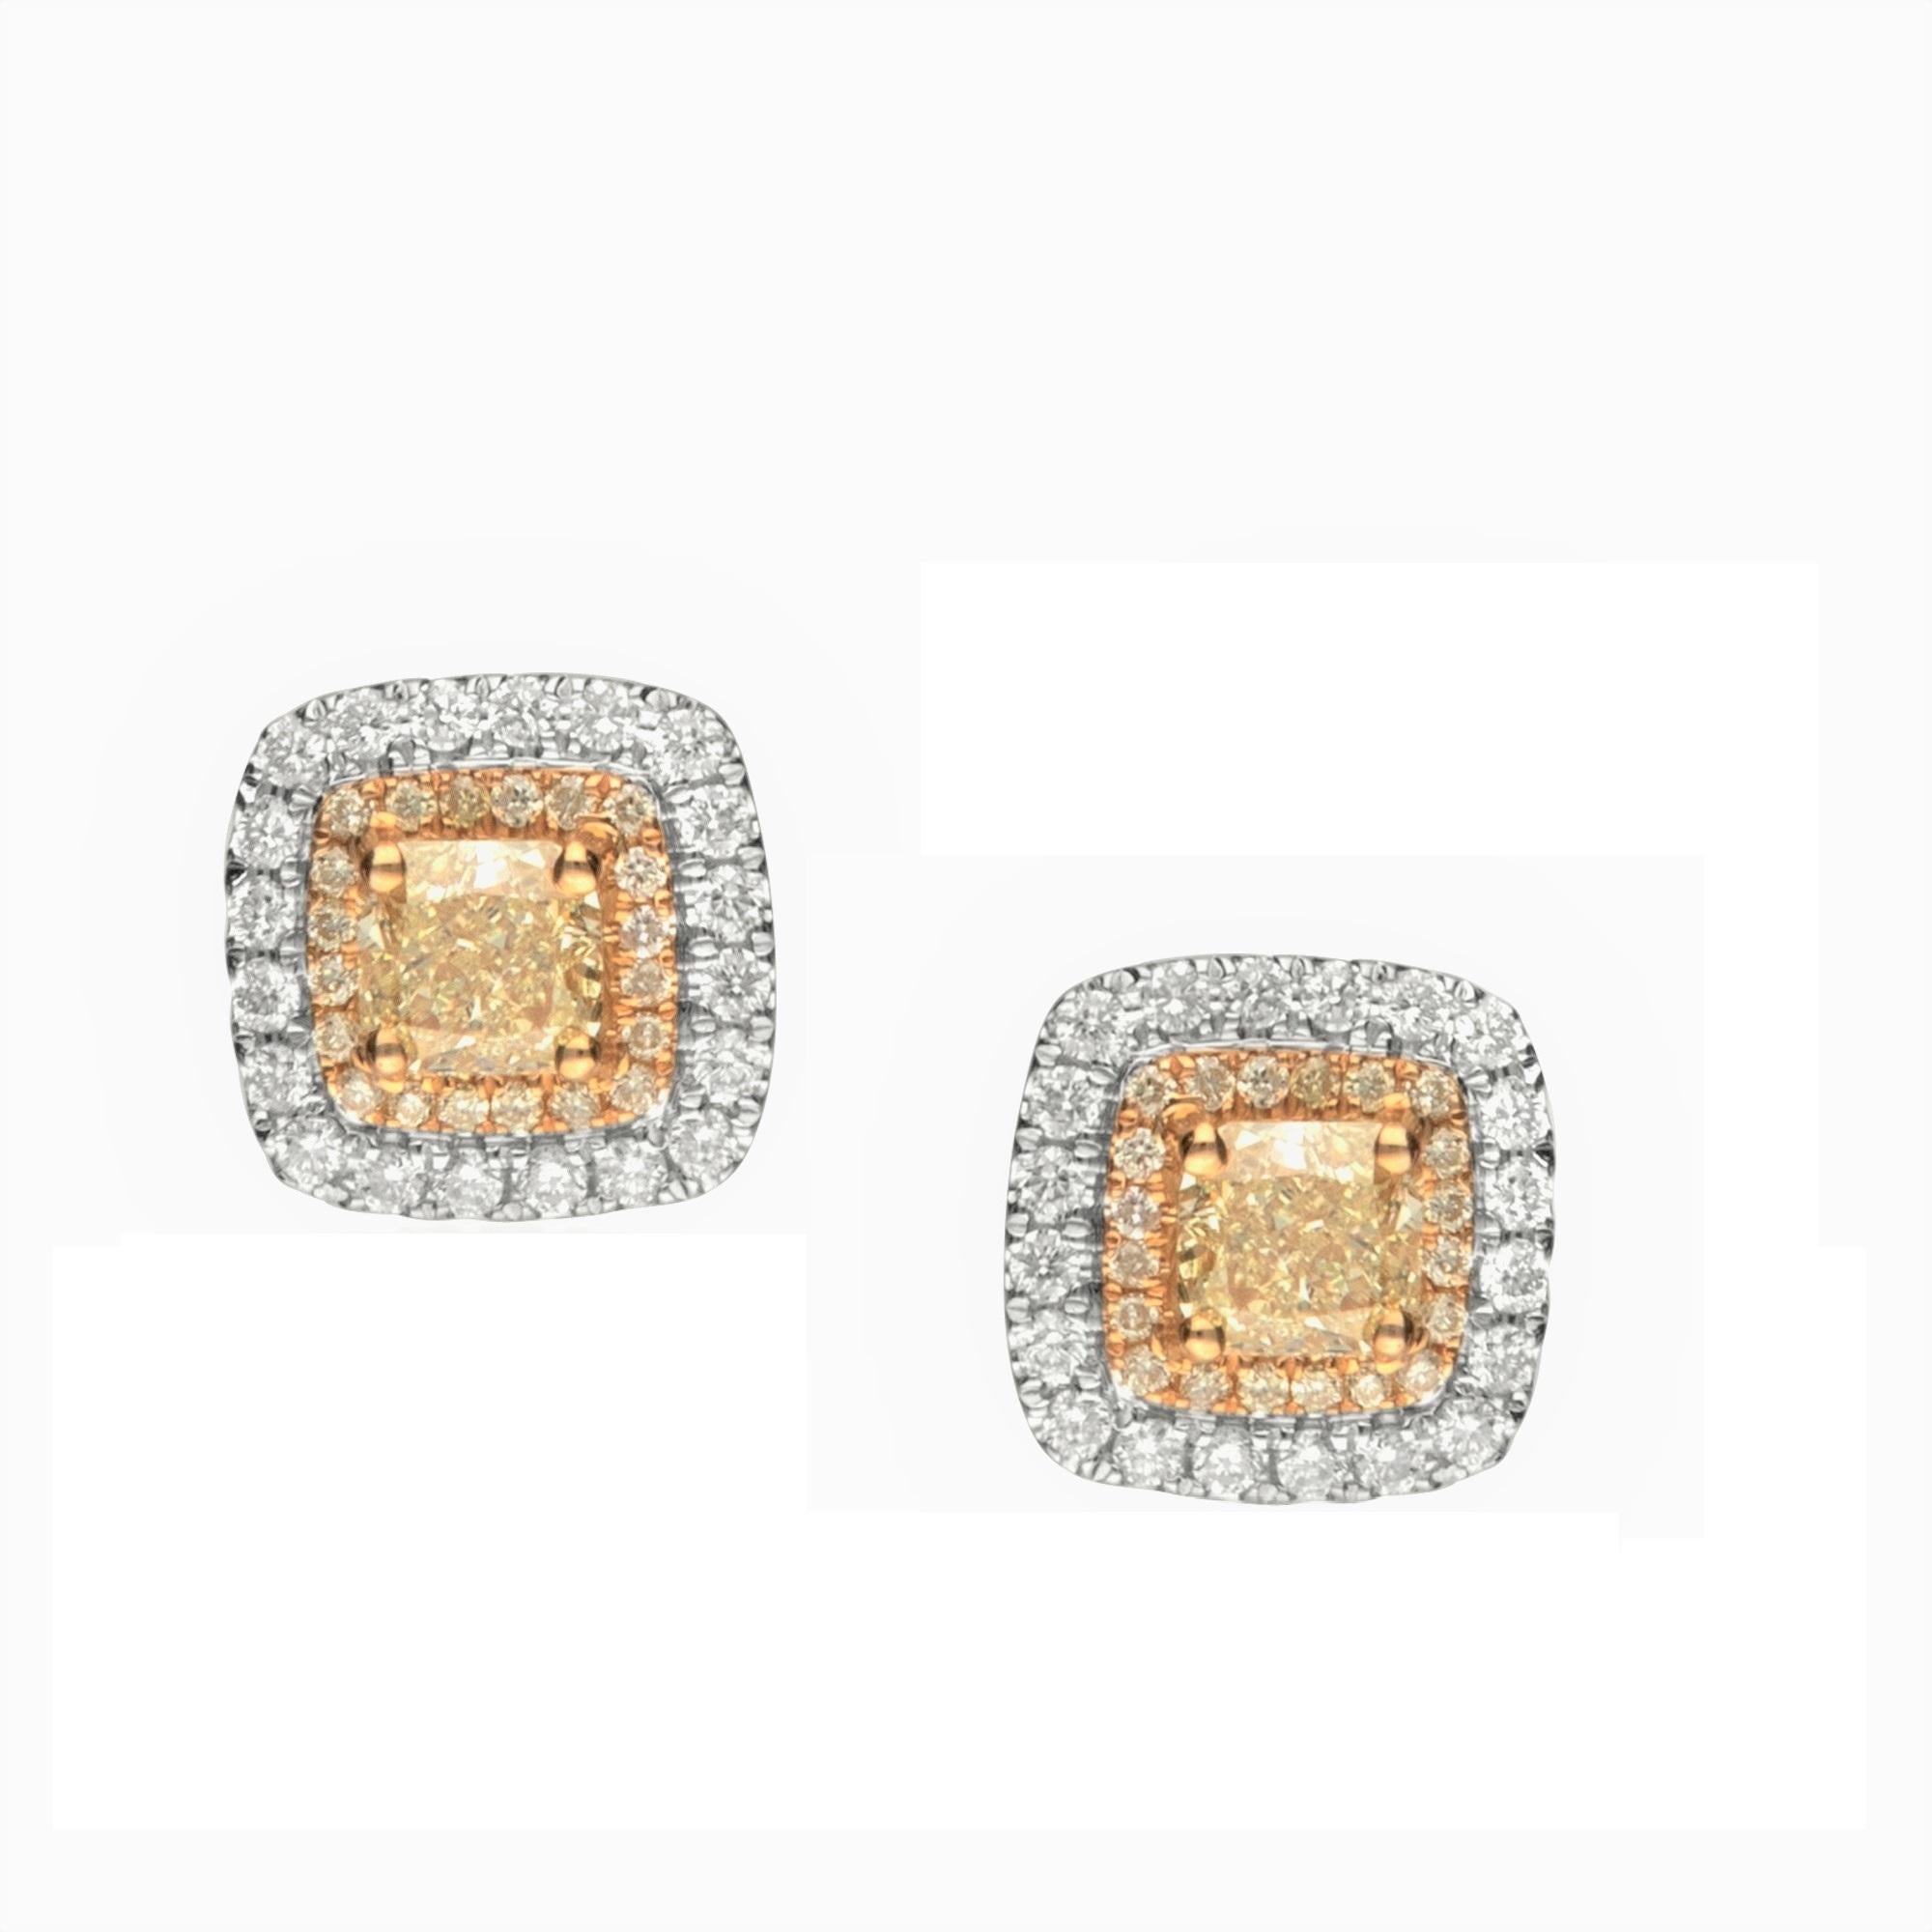 This beautiful pair of 14kt two tone yellow diamond studs by Gin and Grace has center of 2 cushion cut yellow diamonds 1.01 ct. SI quality, surrounded by 40 smaller yellow diamonds 0.13 ct. and 40 round brilliant cut white diamonds 0.30 carat SI